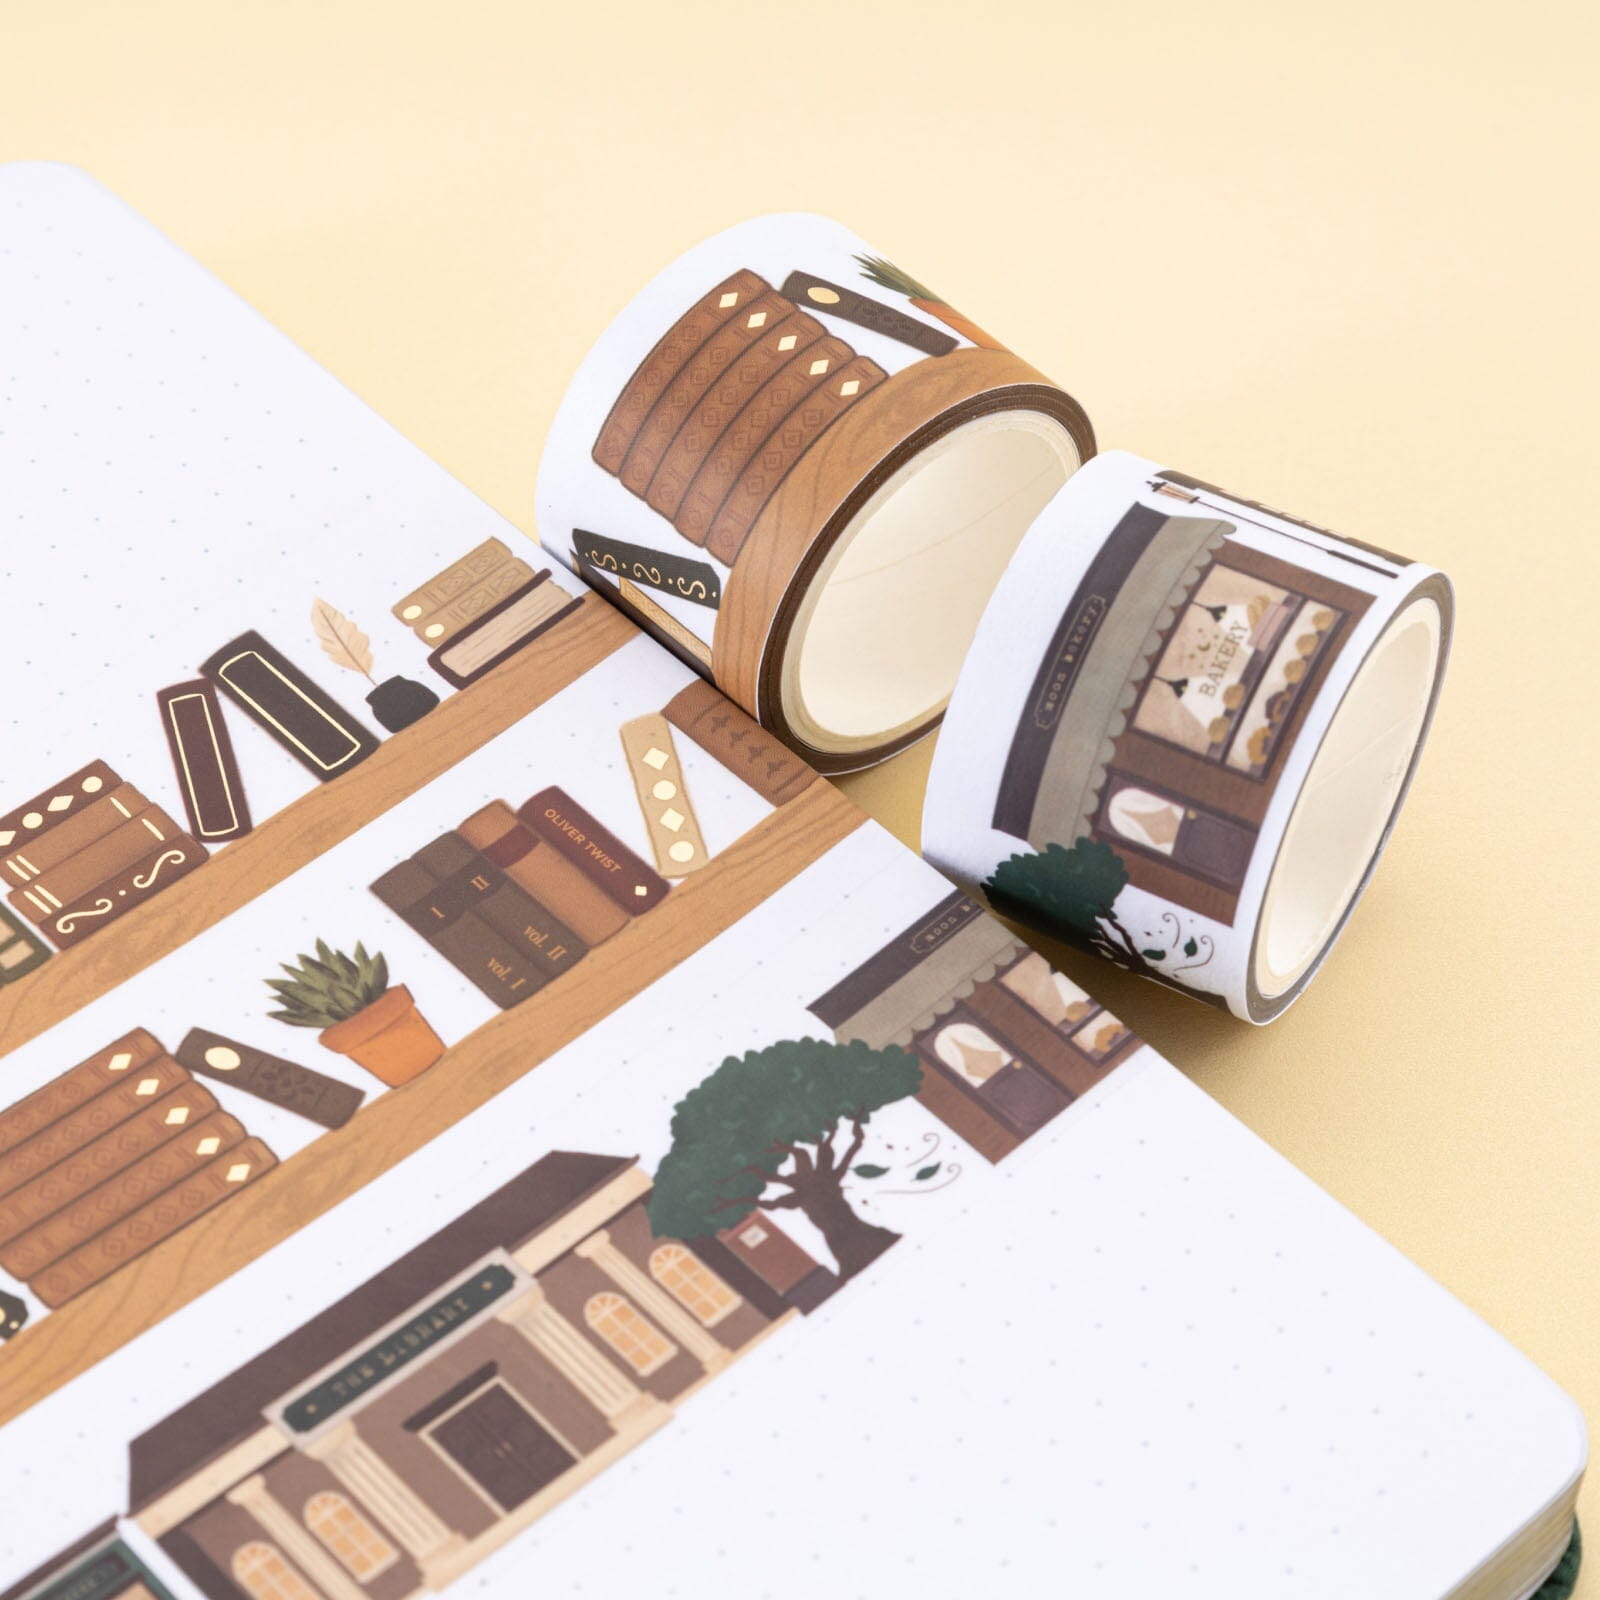 Book washi tape rolls with book shelf design and shop front designs